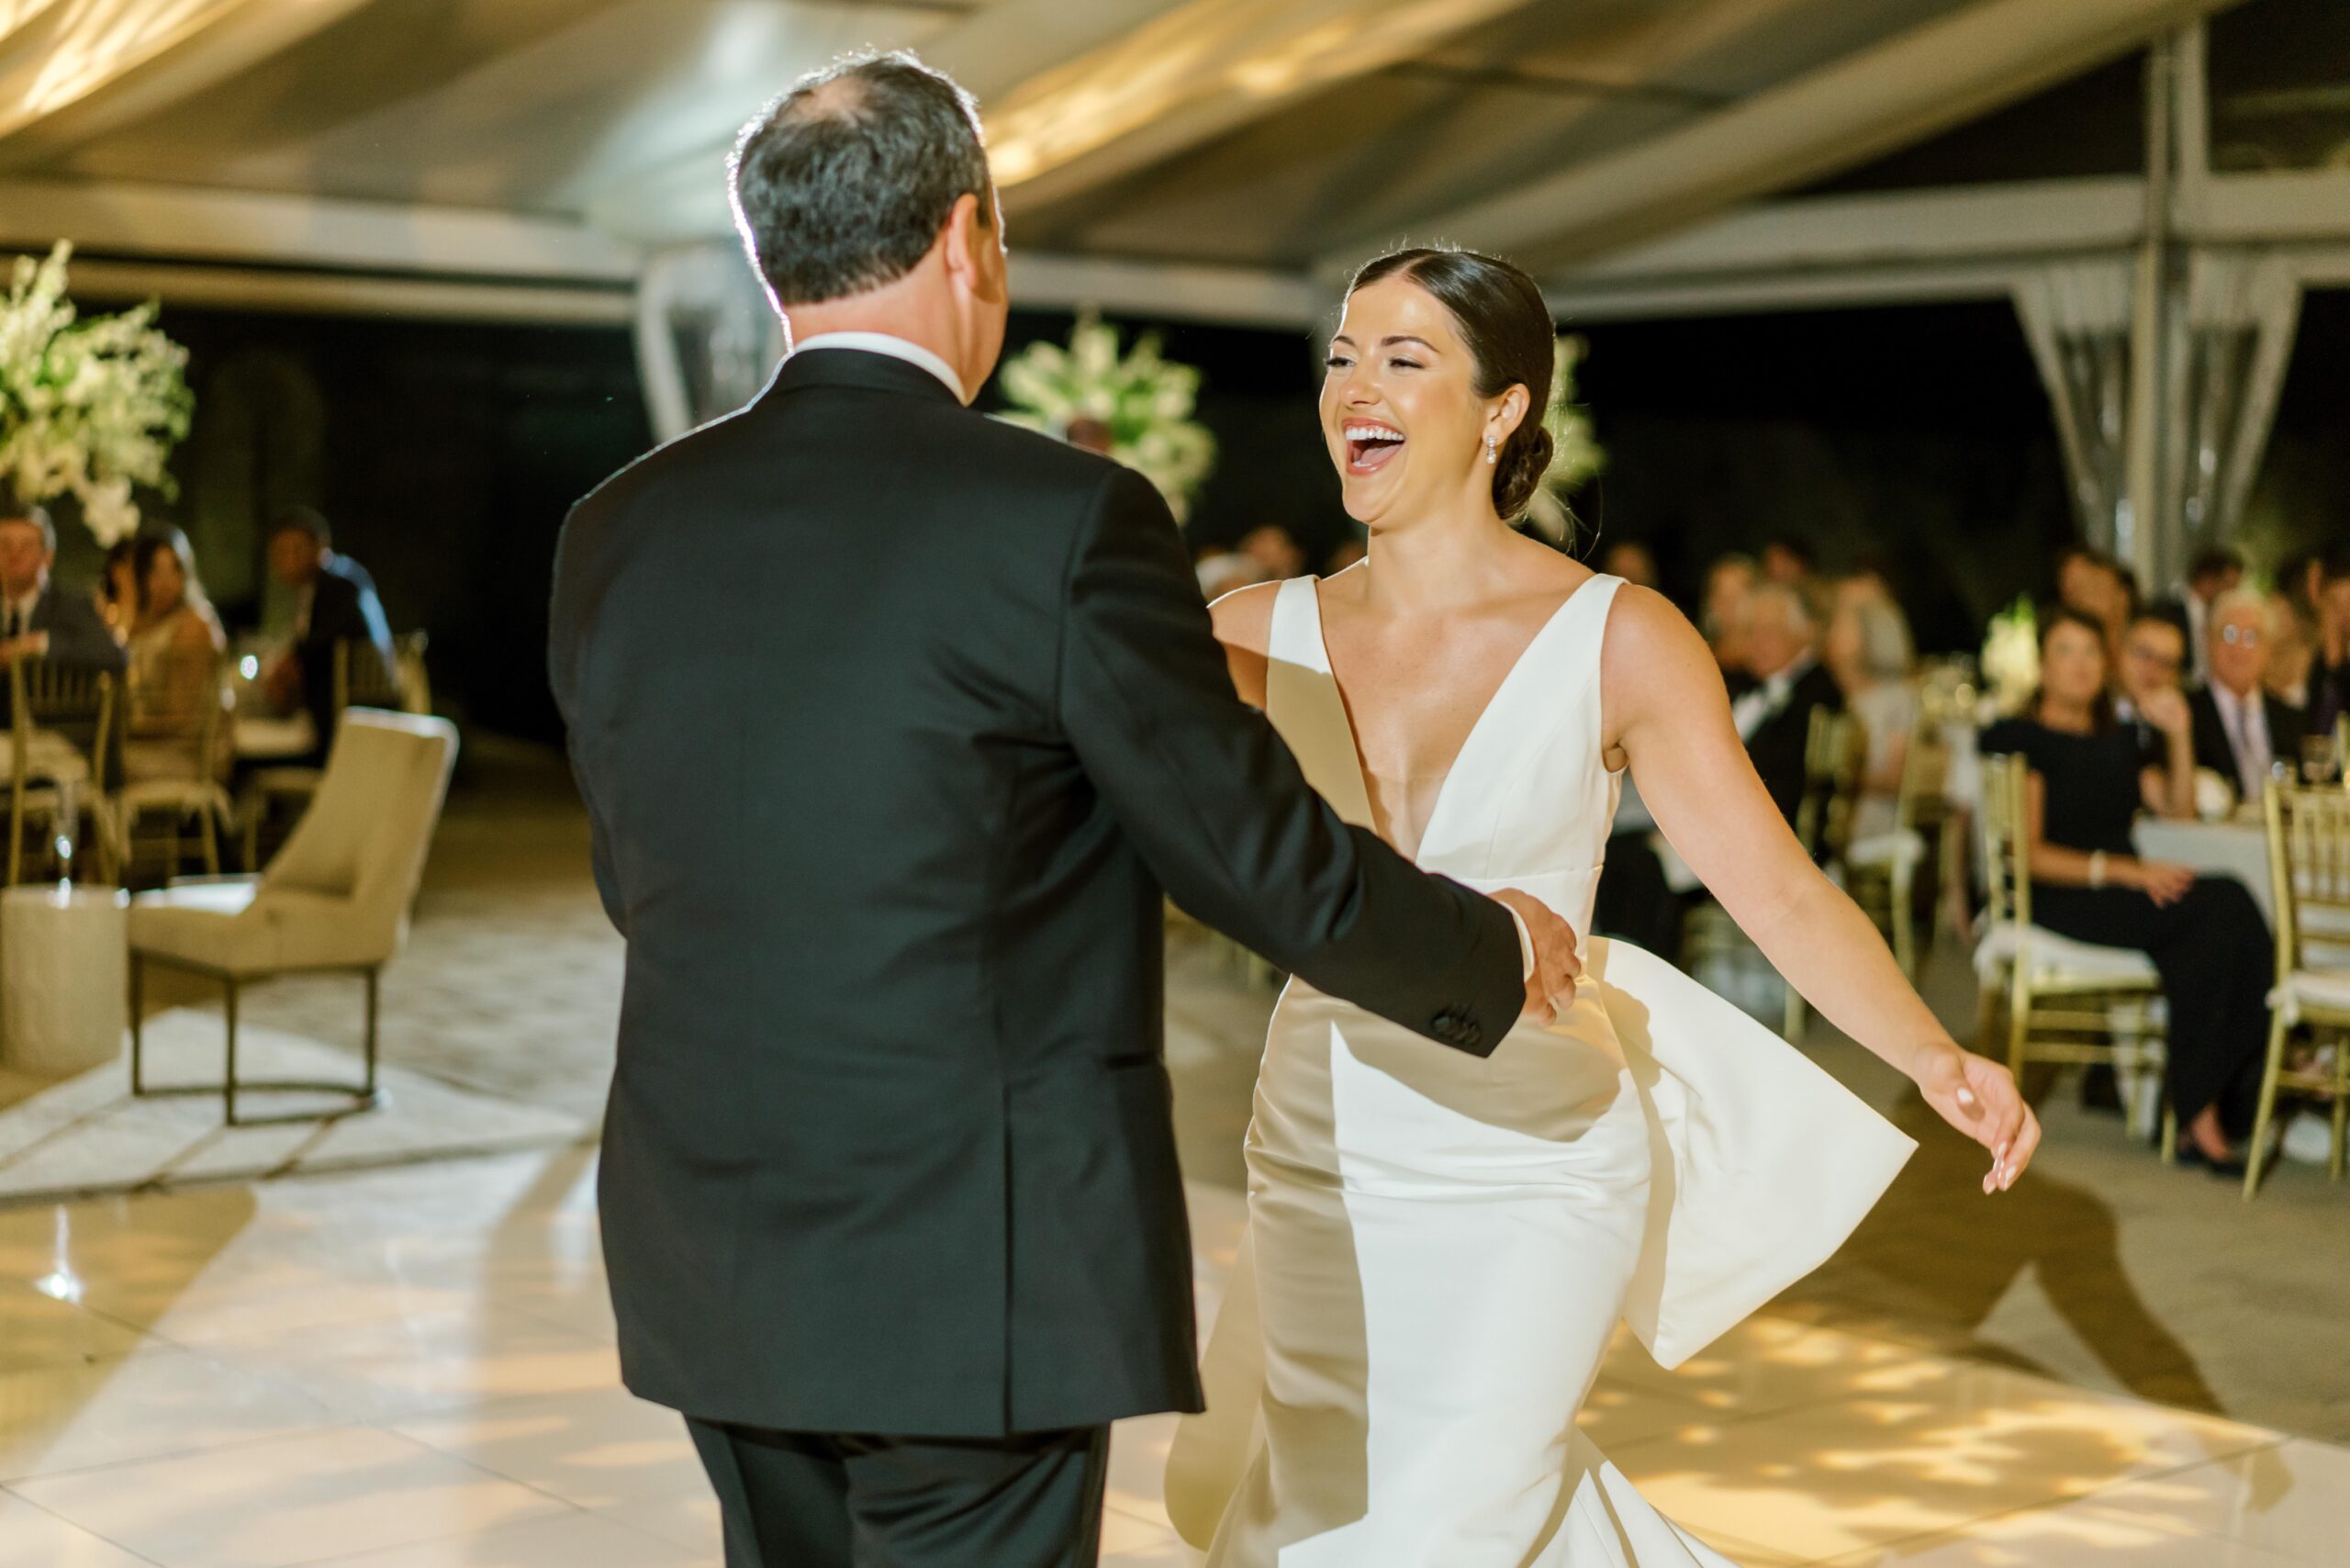 Bride dances with her father